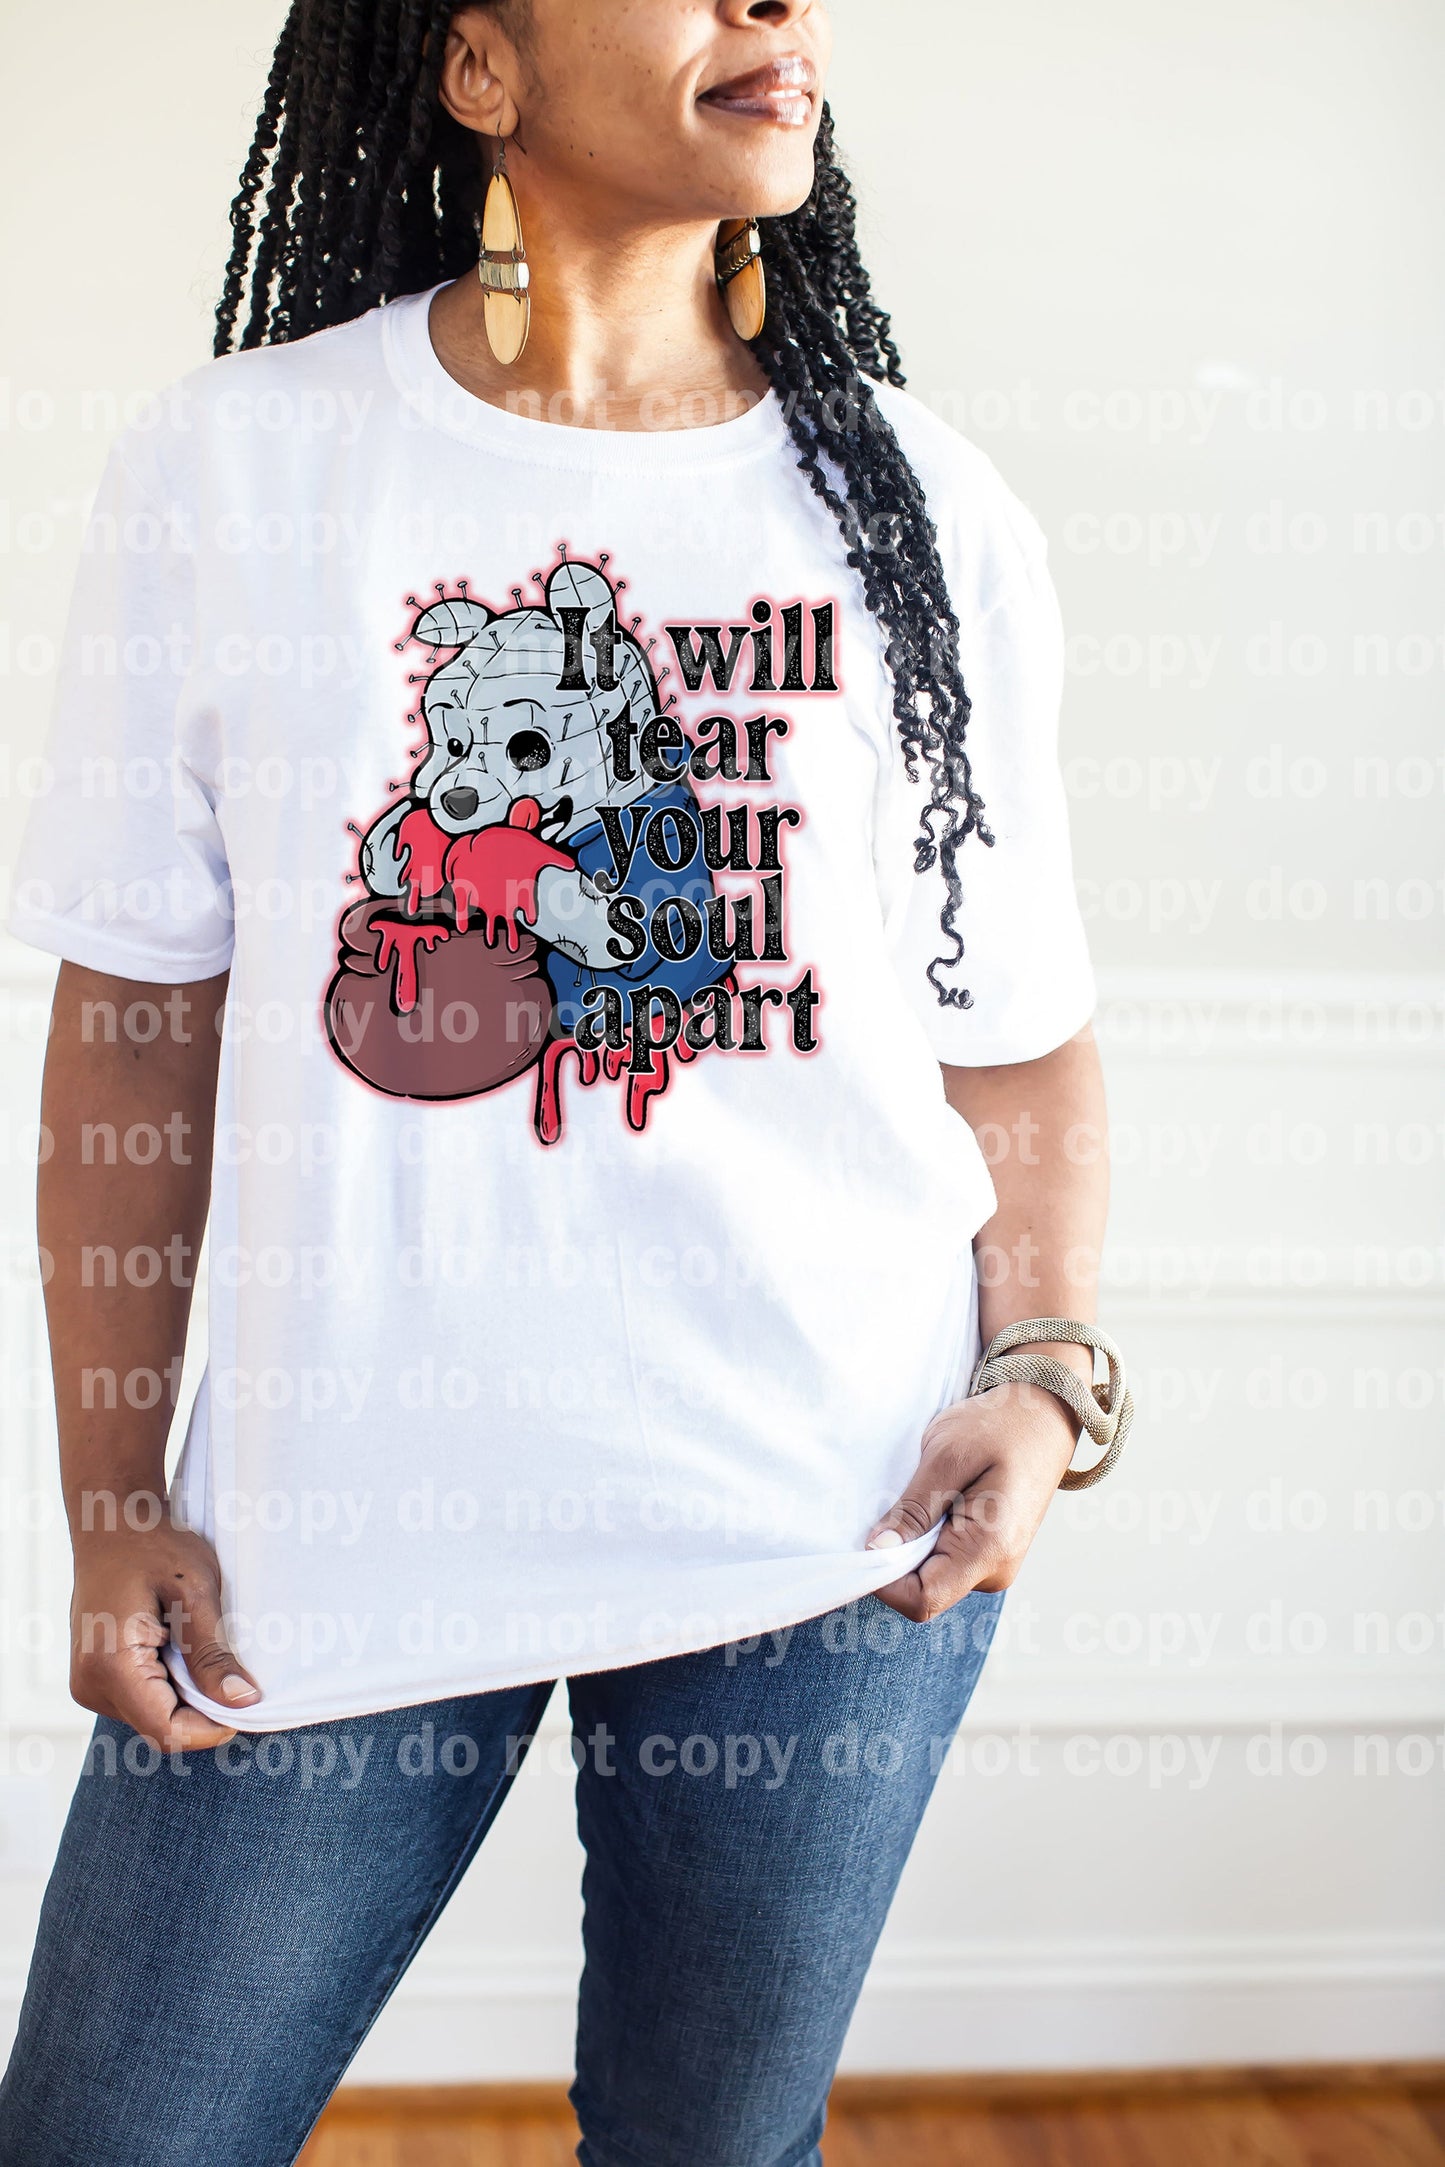 It Will Tear Your Soul Apart Dream Print or Sublimation Print